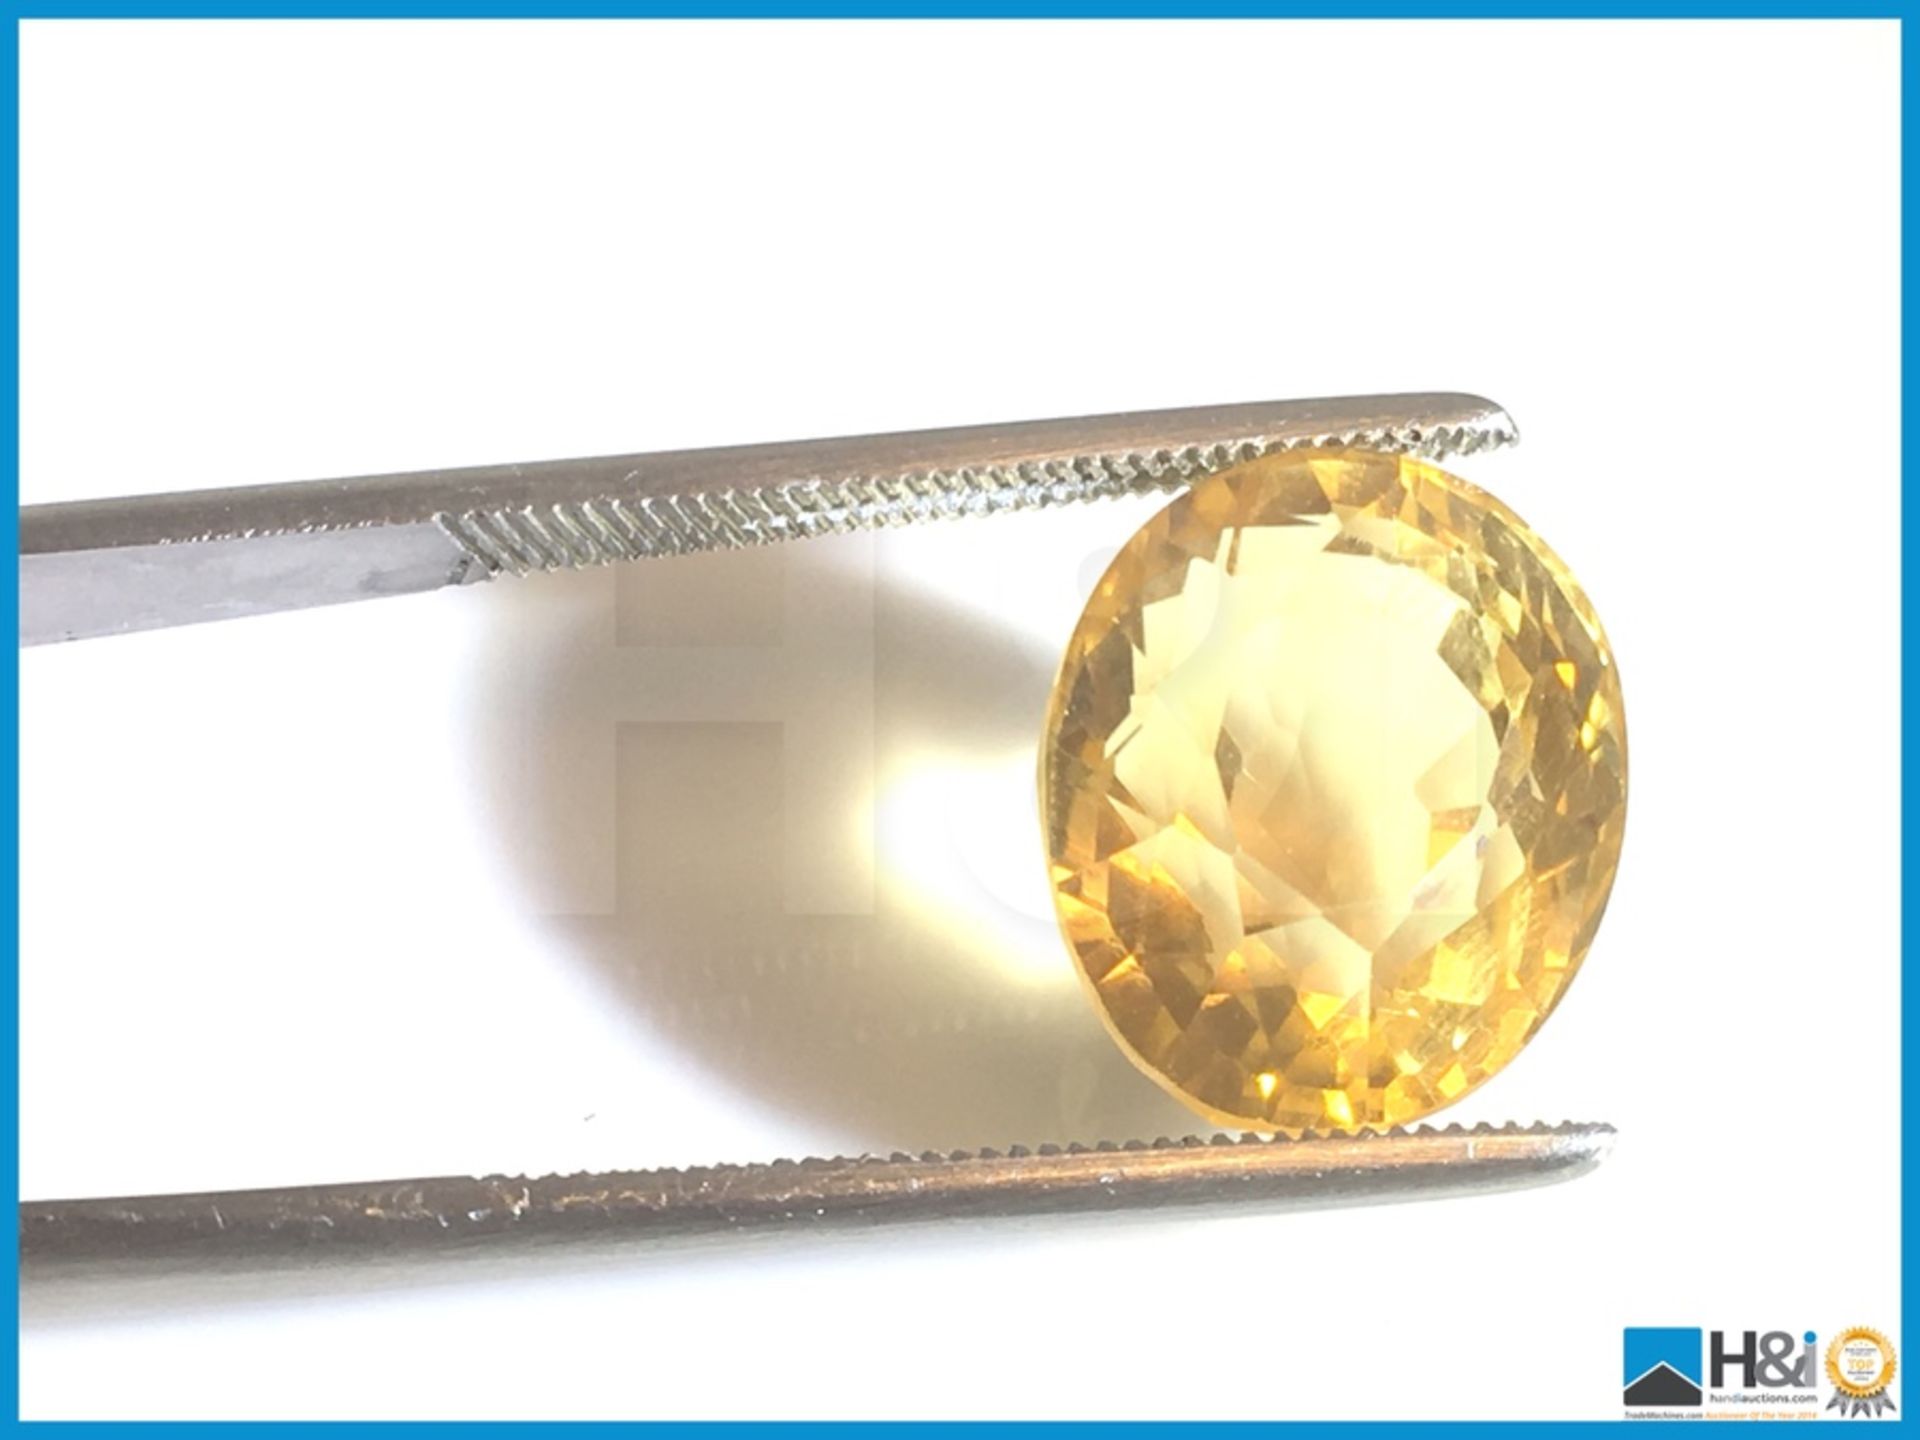 9.80ct Natural Citrine in Yellow. Oval Cut, Transparent 13.90x11.44x10.50mm. Certification: None - Image 3 of 3